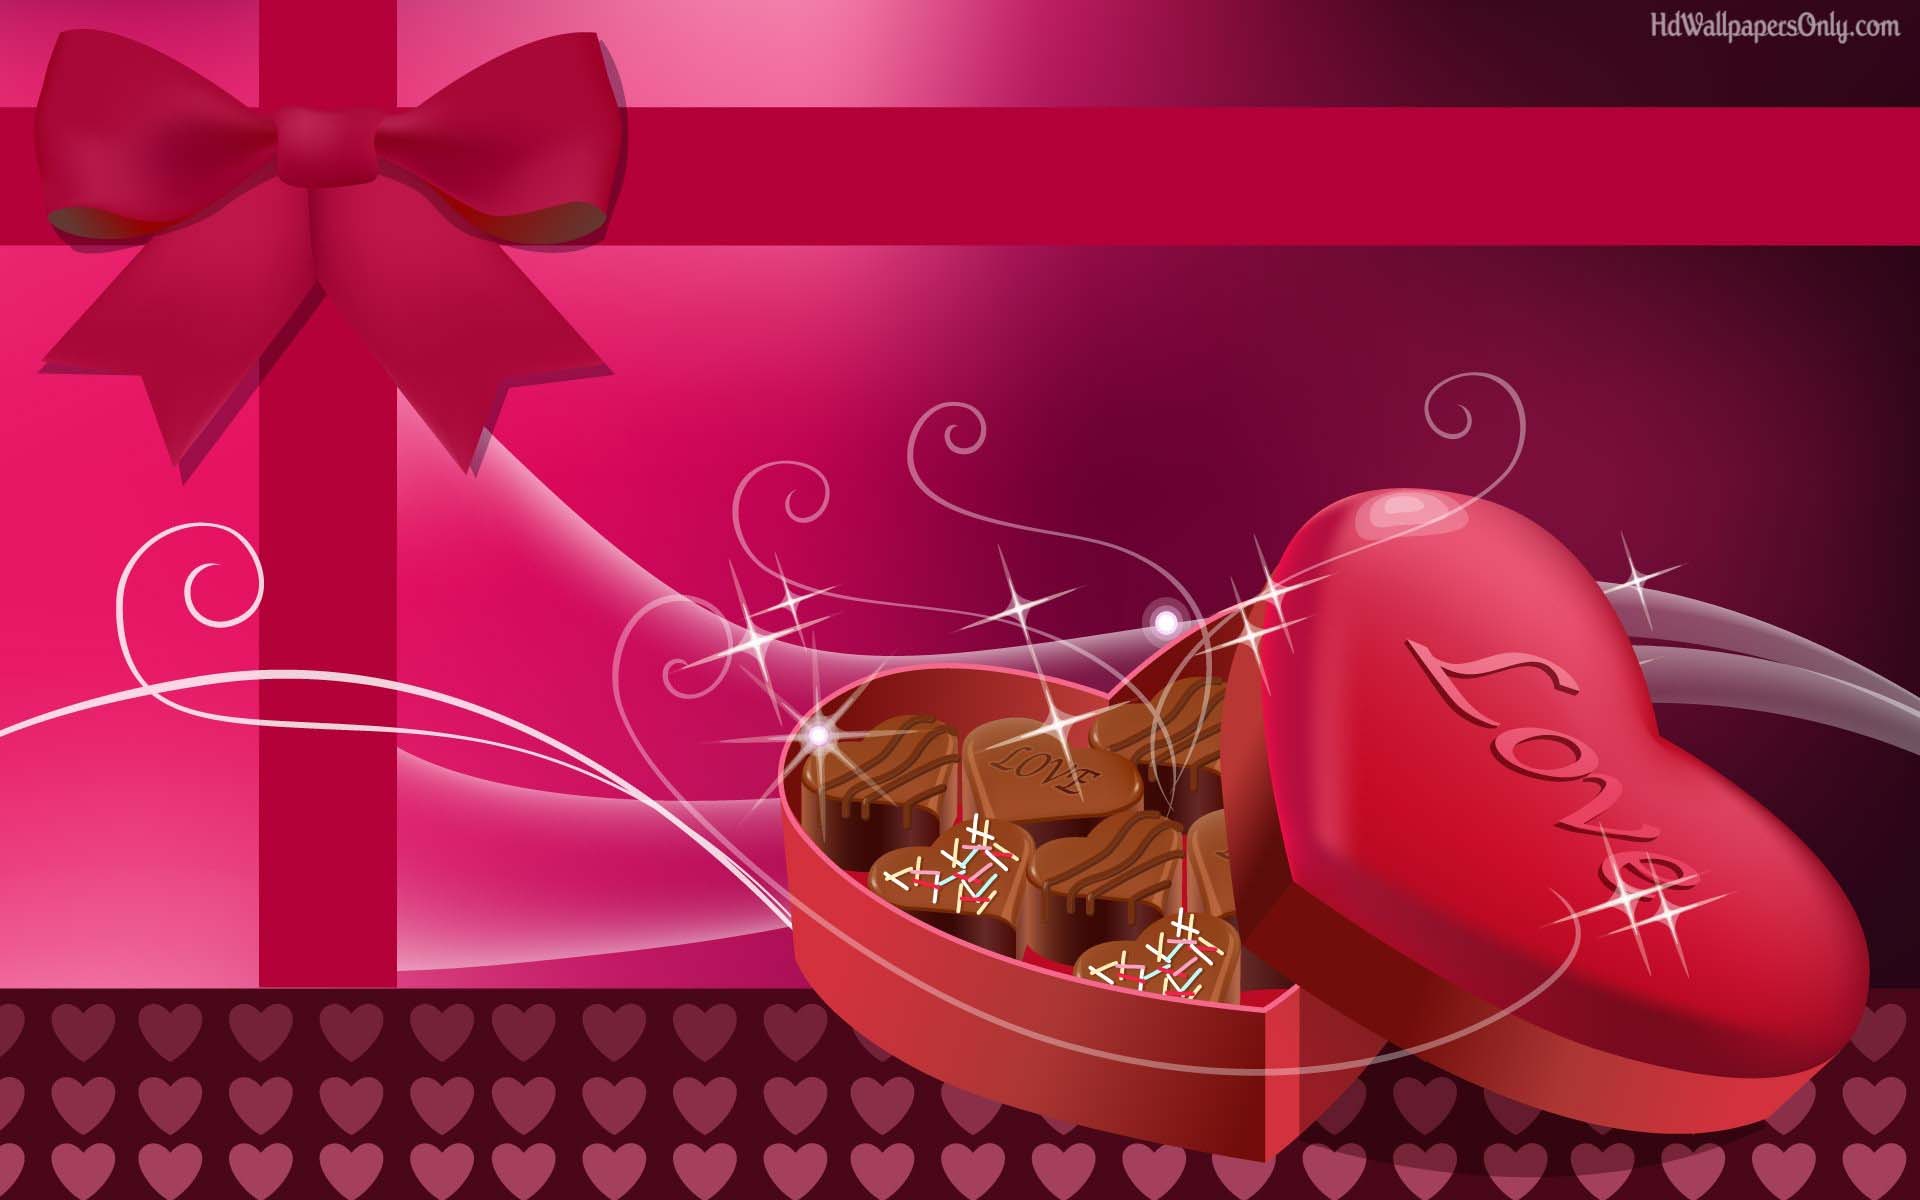 Valentine&;s Day 2015 Picture Wallpaper OnlyHD Wallpaper Only